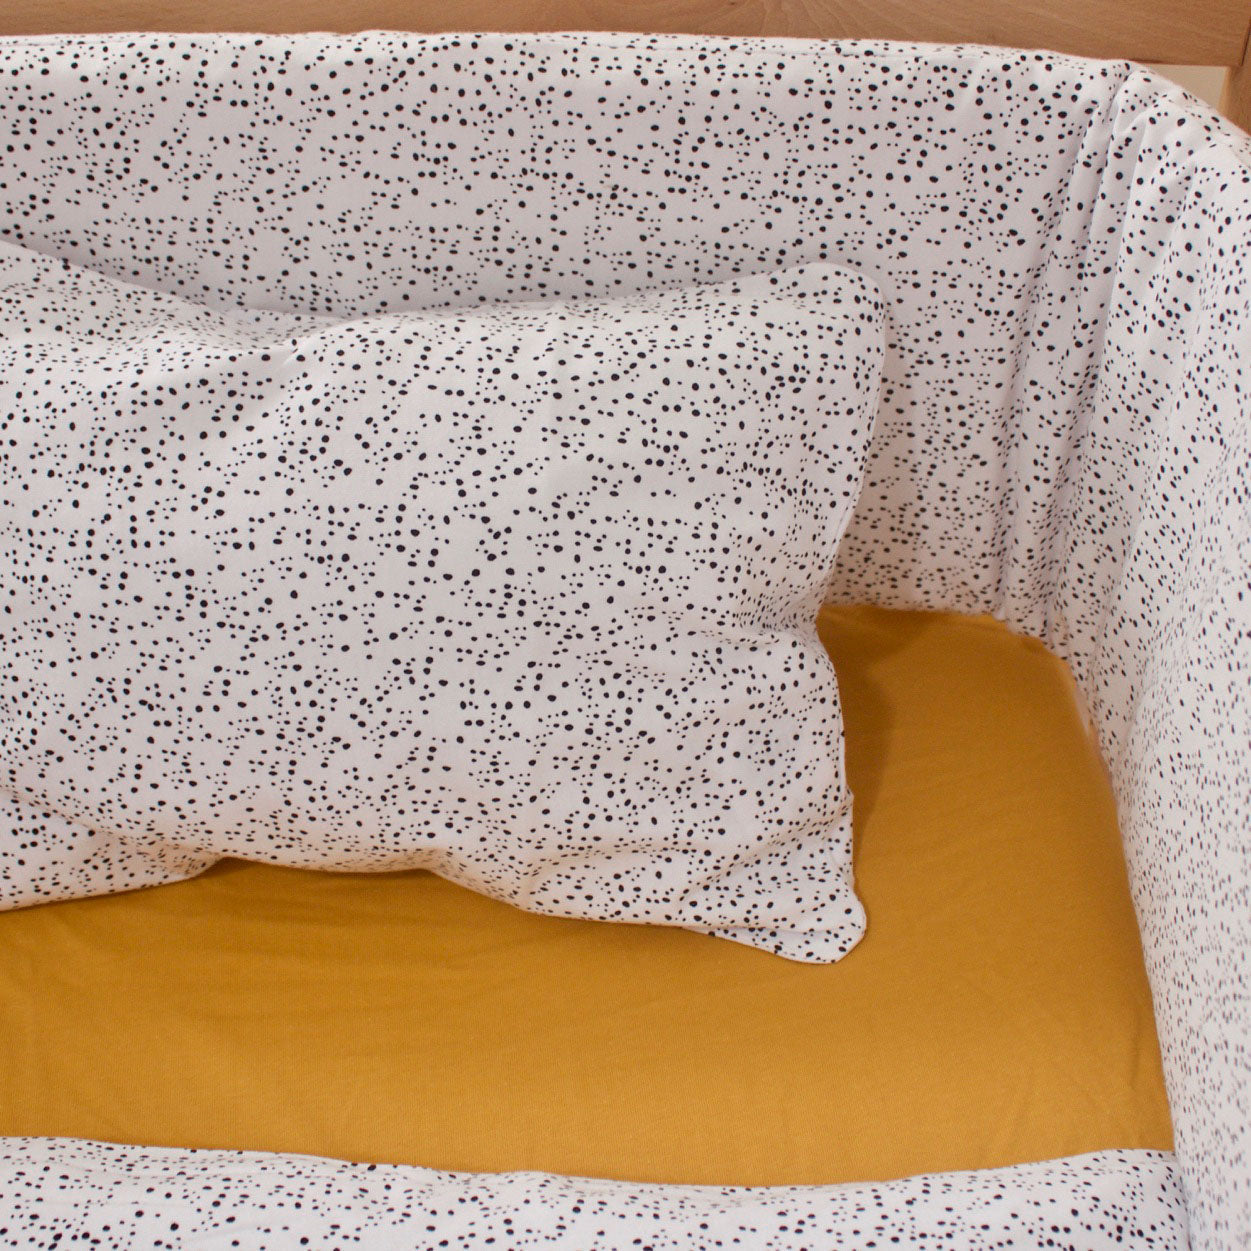 Duvet Cover and Pillowcase - Speckles